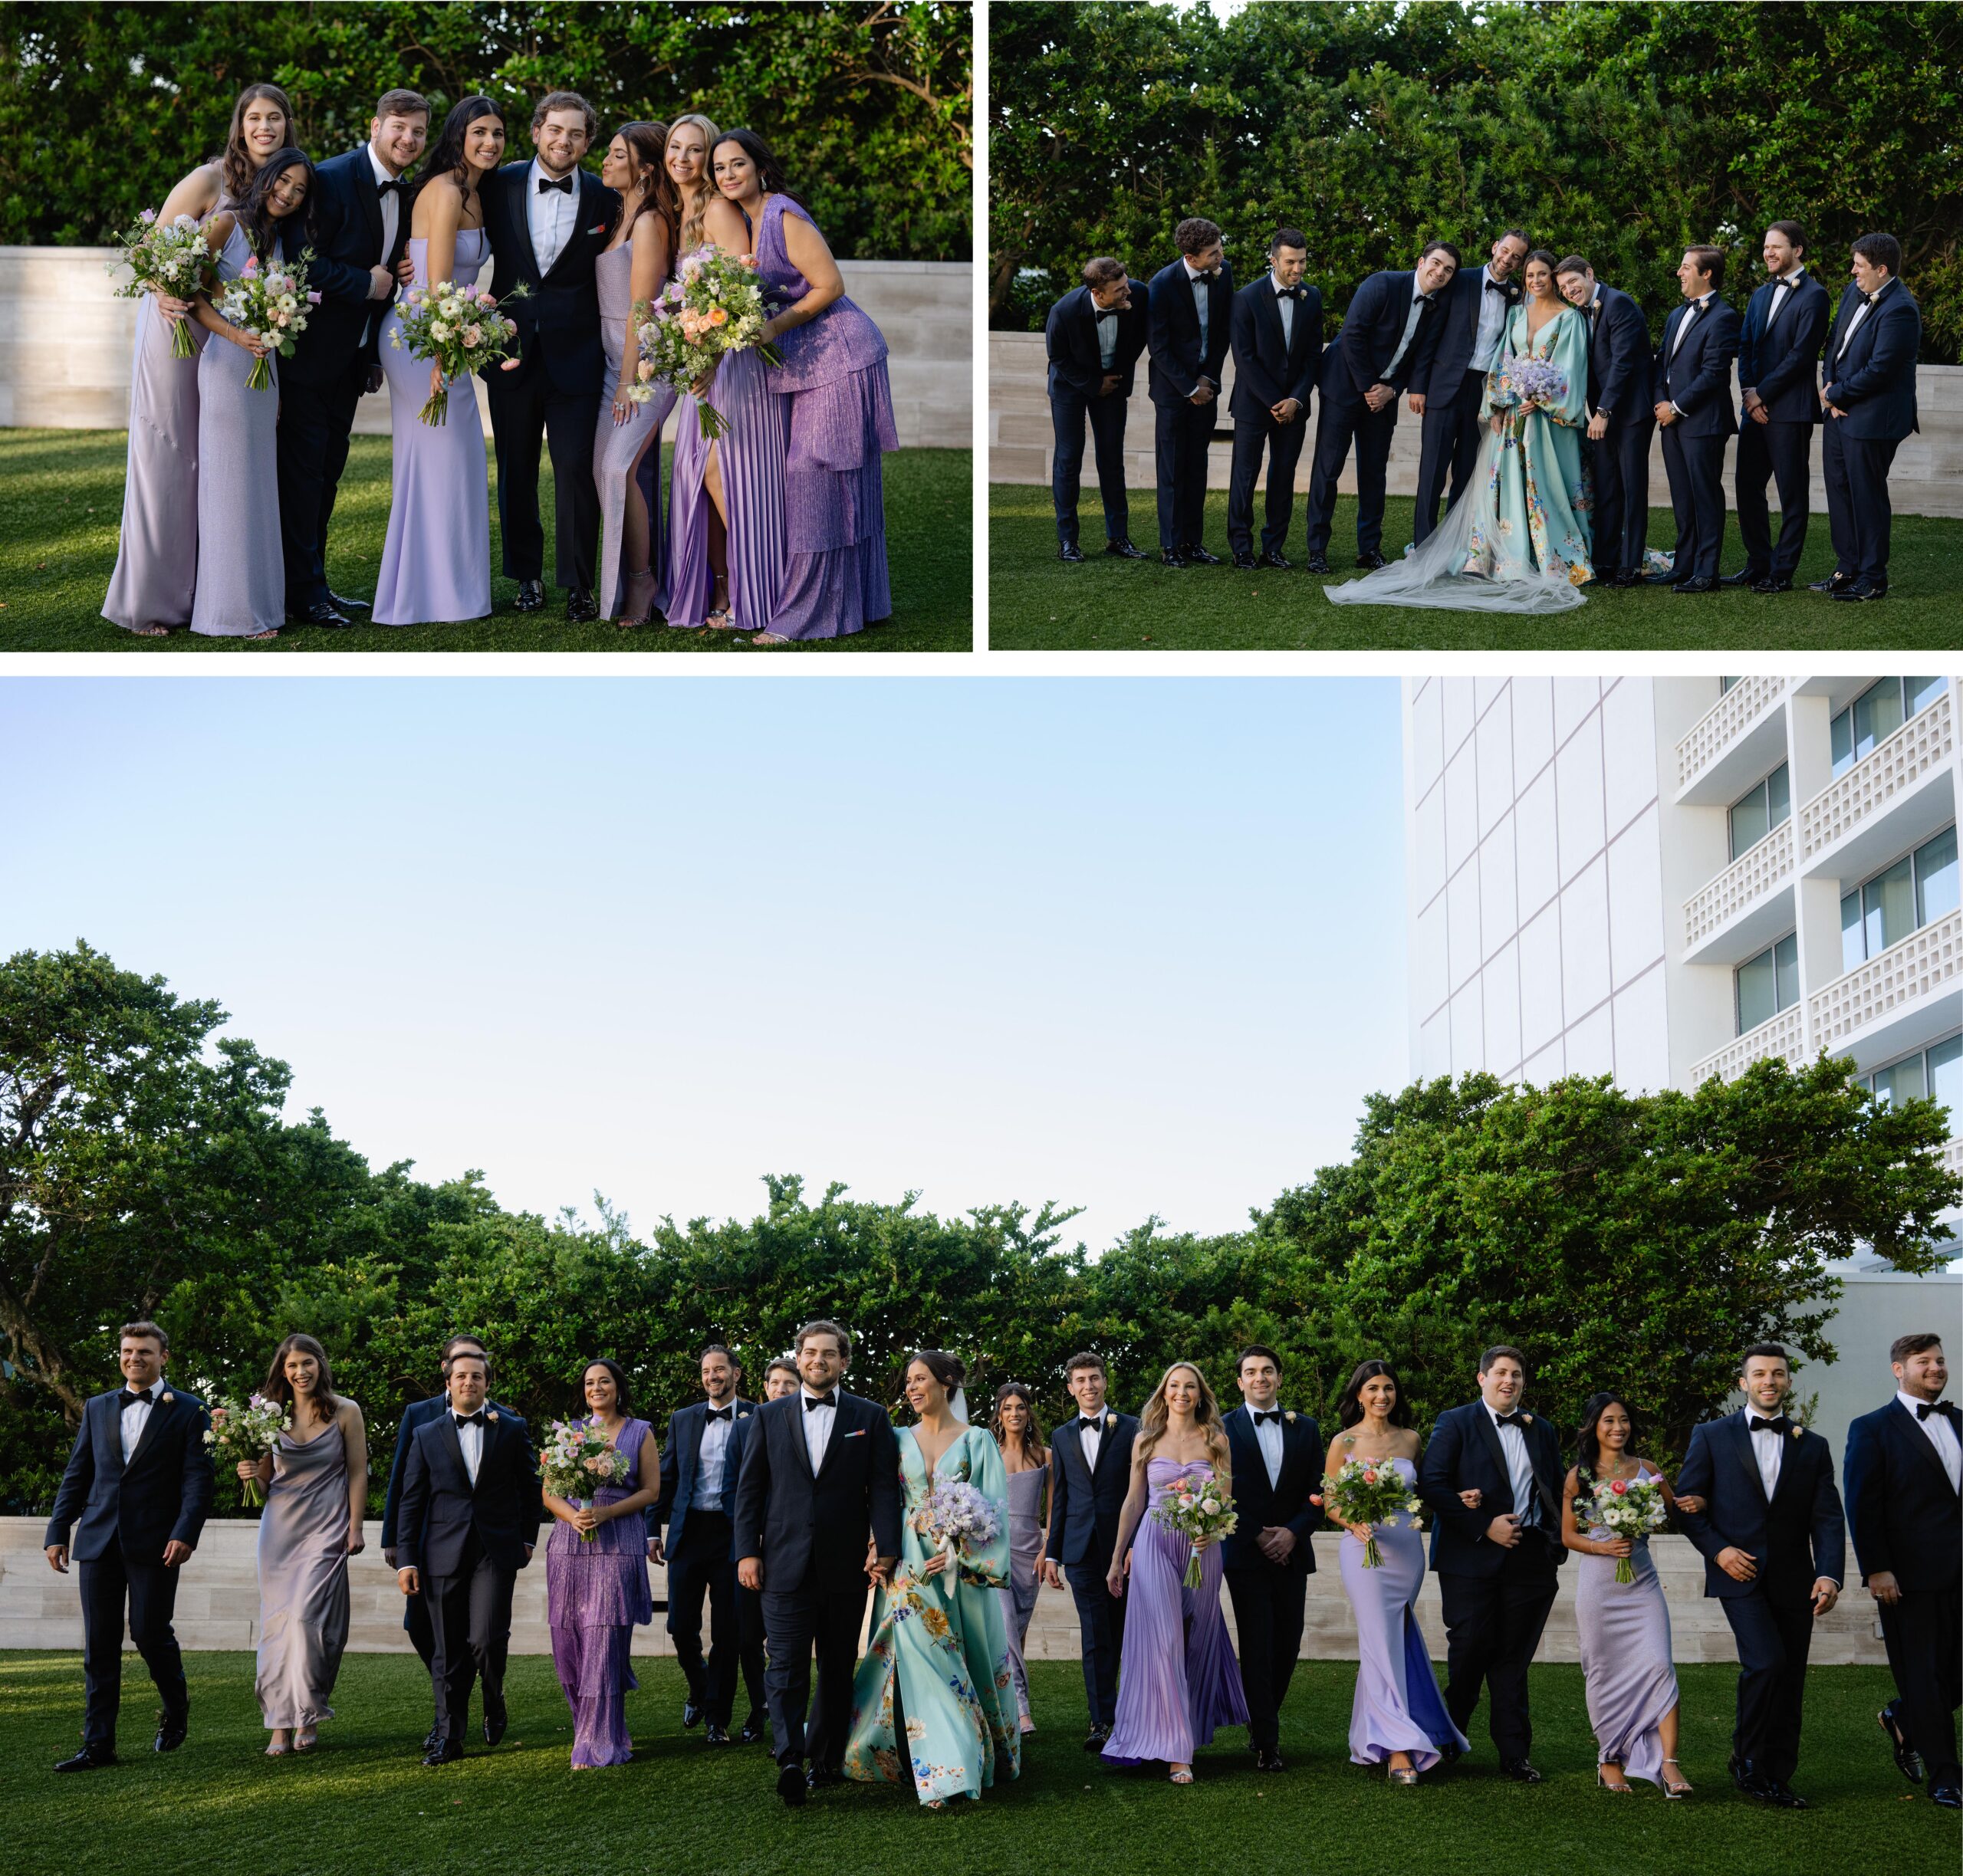 Kate &amp; Zach with their stunning bridesmaids in lavender and fine groomsmen in tuxedos. 